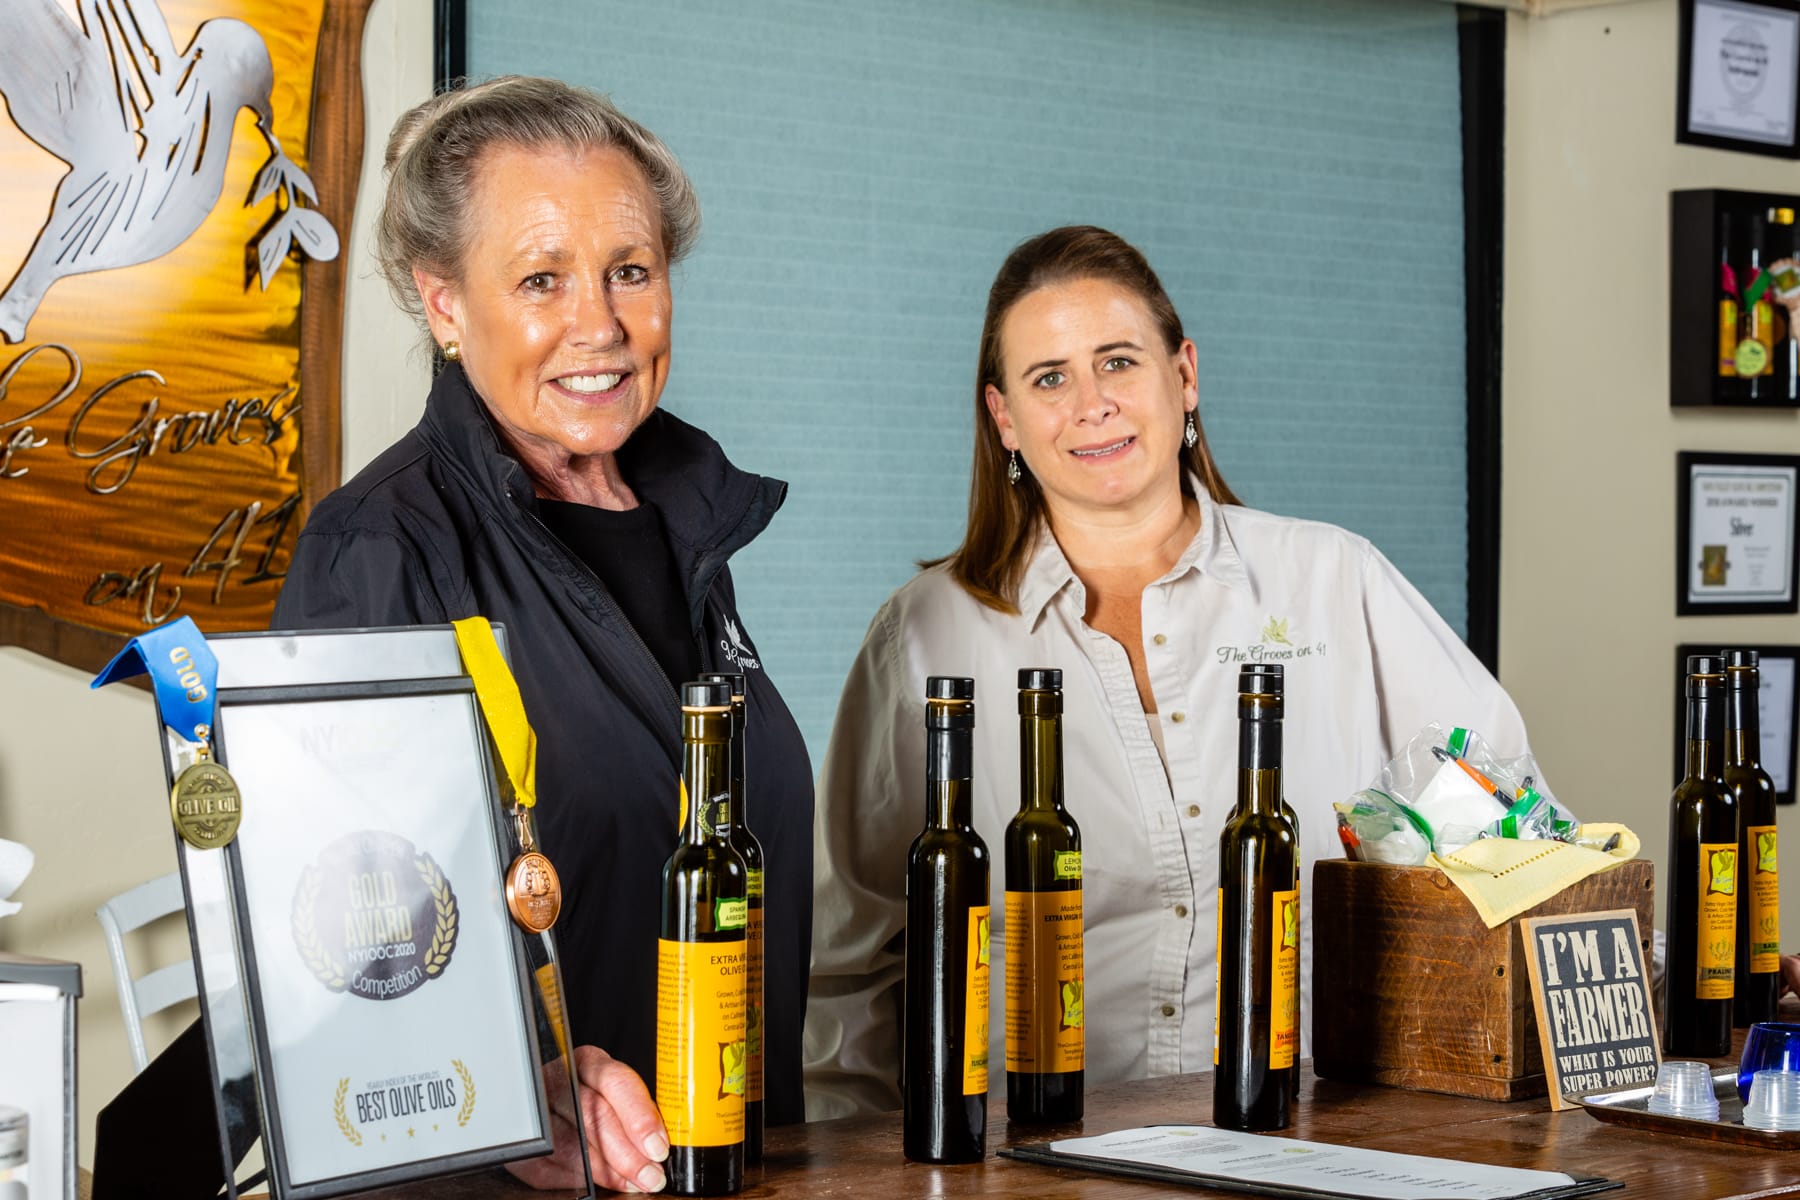 north-america-profiles-production-the-best-olive-oils-after-10-successful-years-farming-motherdaughter-team-pivots-to-oleotourism-olive-oil-times